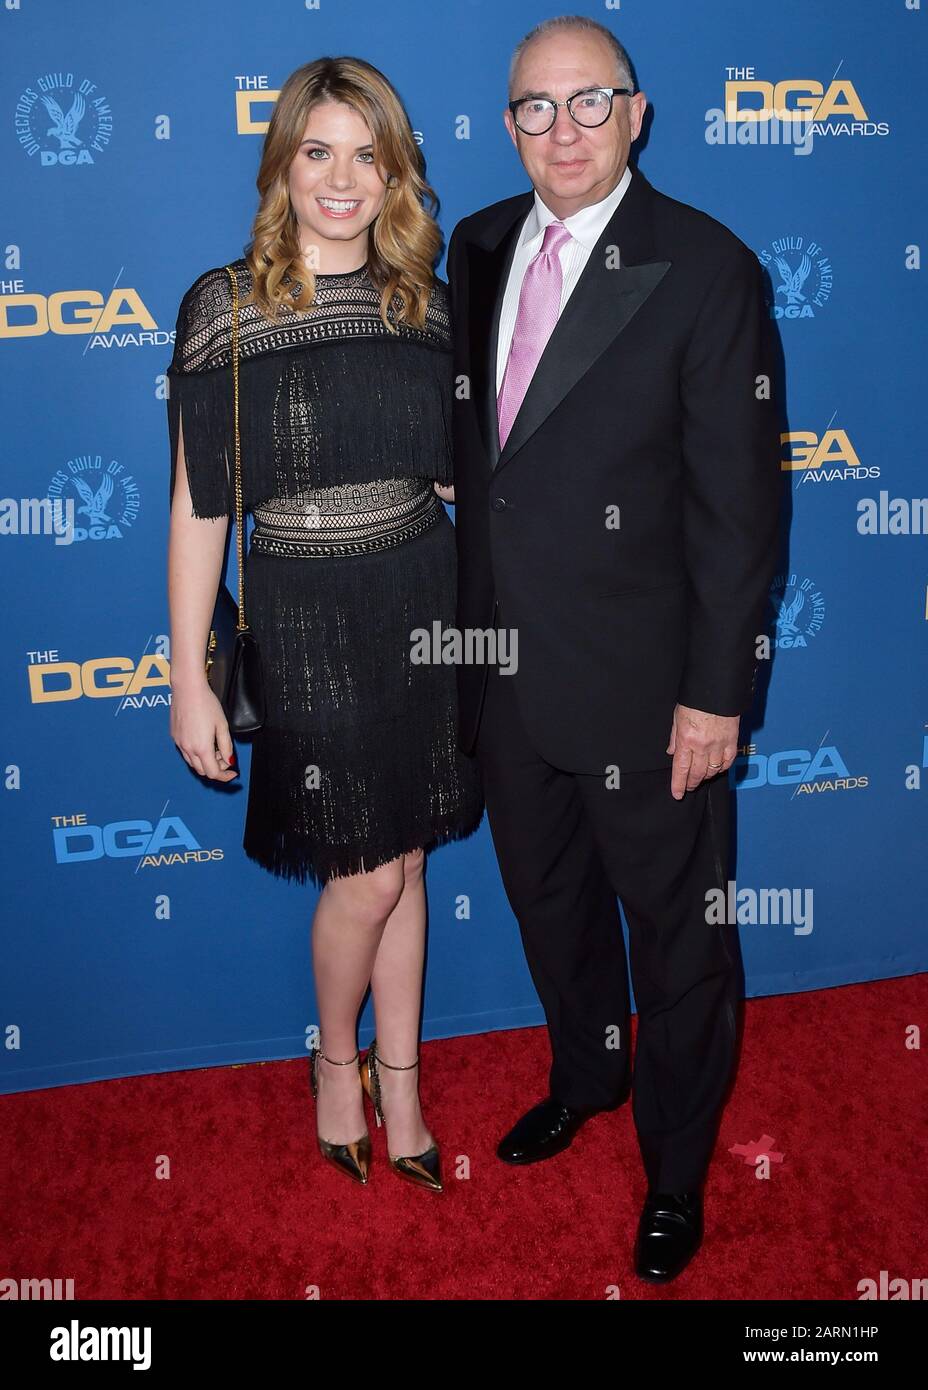 LOS ANGELES, CALIFORNIA, USA - JANUARY 25: Chloe Sonnenfeld and Barry Sonnenfeld arrive at the 72nd Annual Directors Guild Of America Awards held at The Ritz-Carlton Hotel at L.A. Live on January 25, 2020 in Los Angeles, California, United States. (Photo by Image Press Agency) Stock Photo